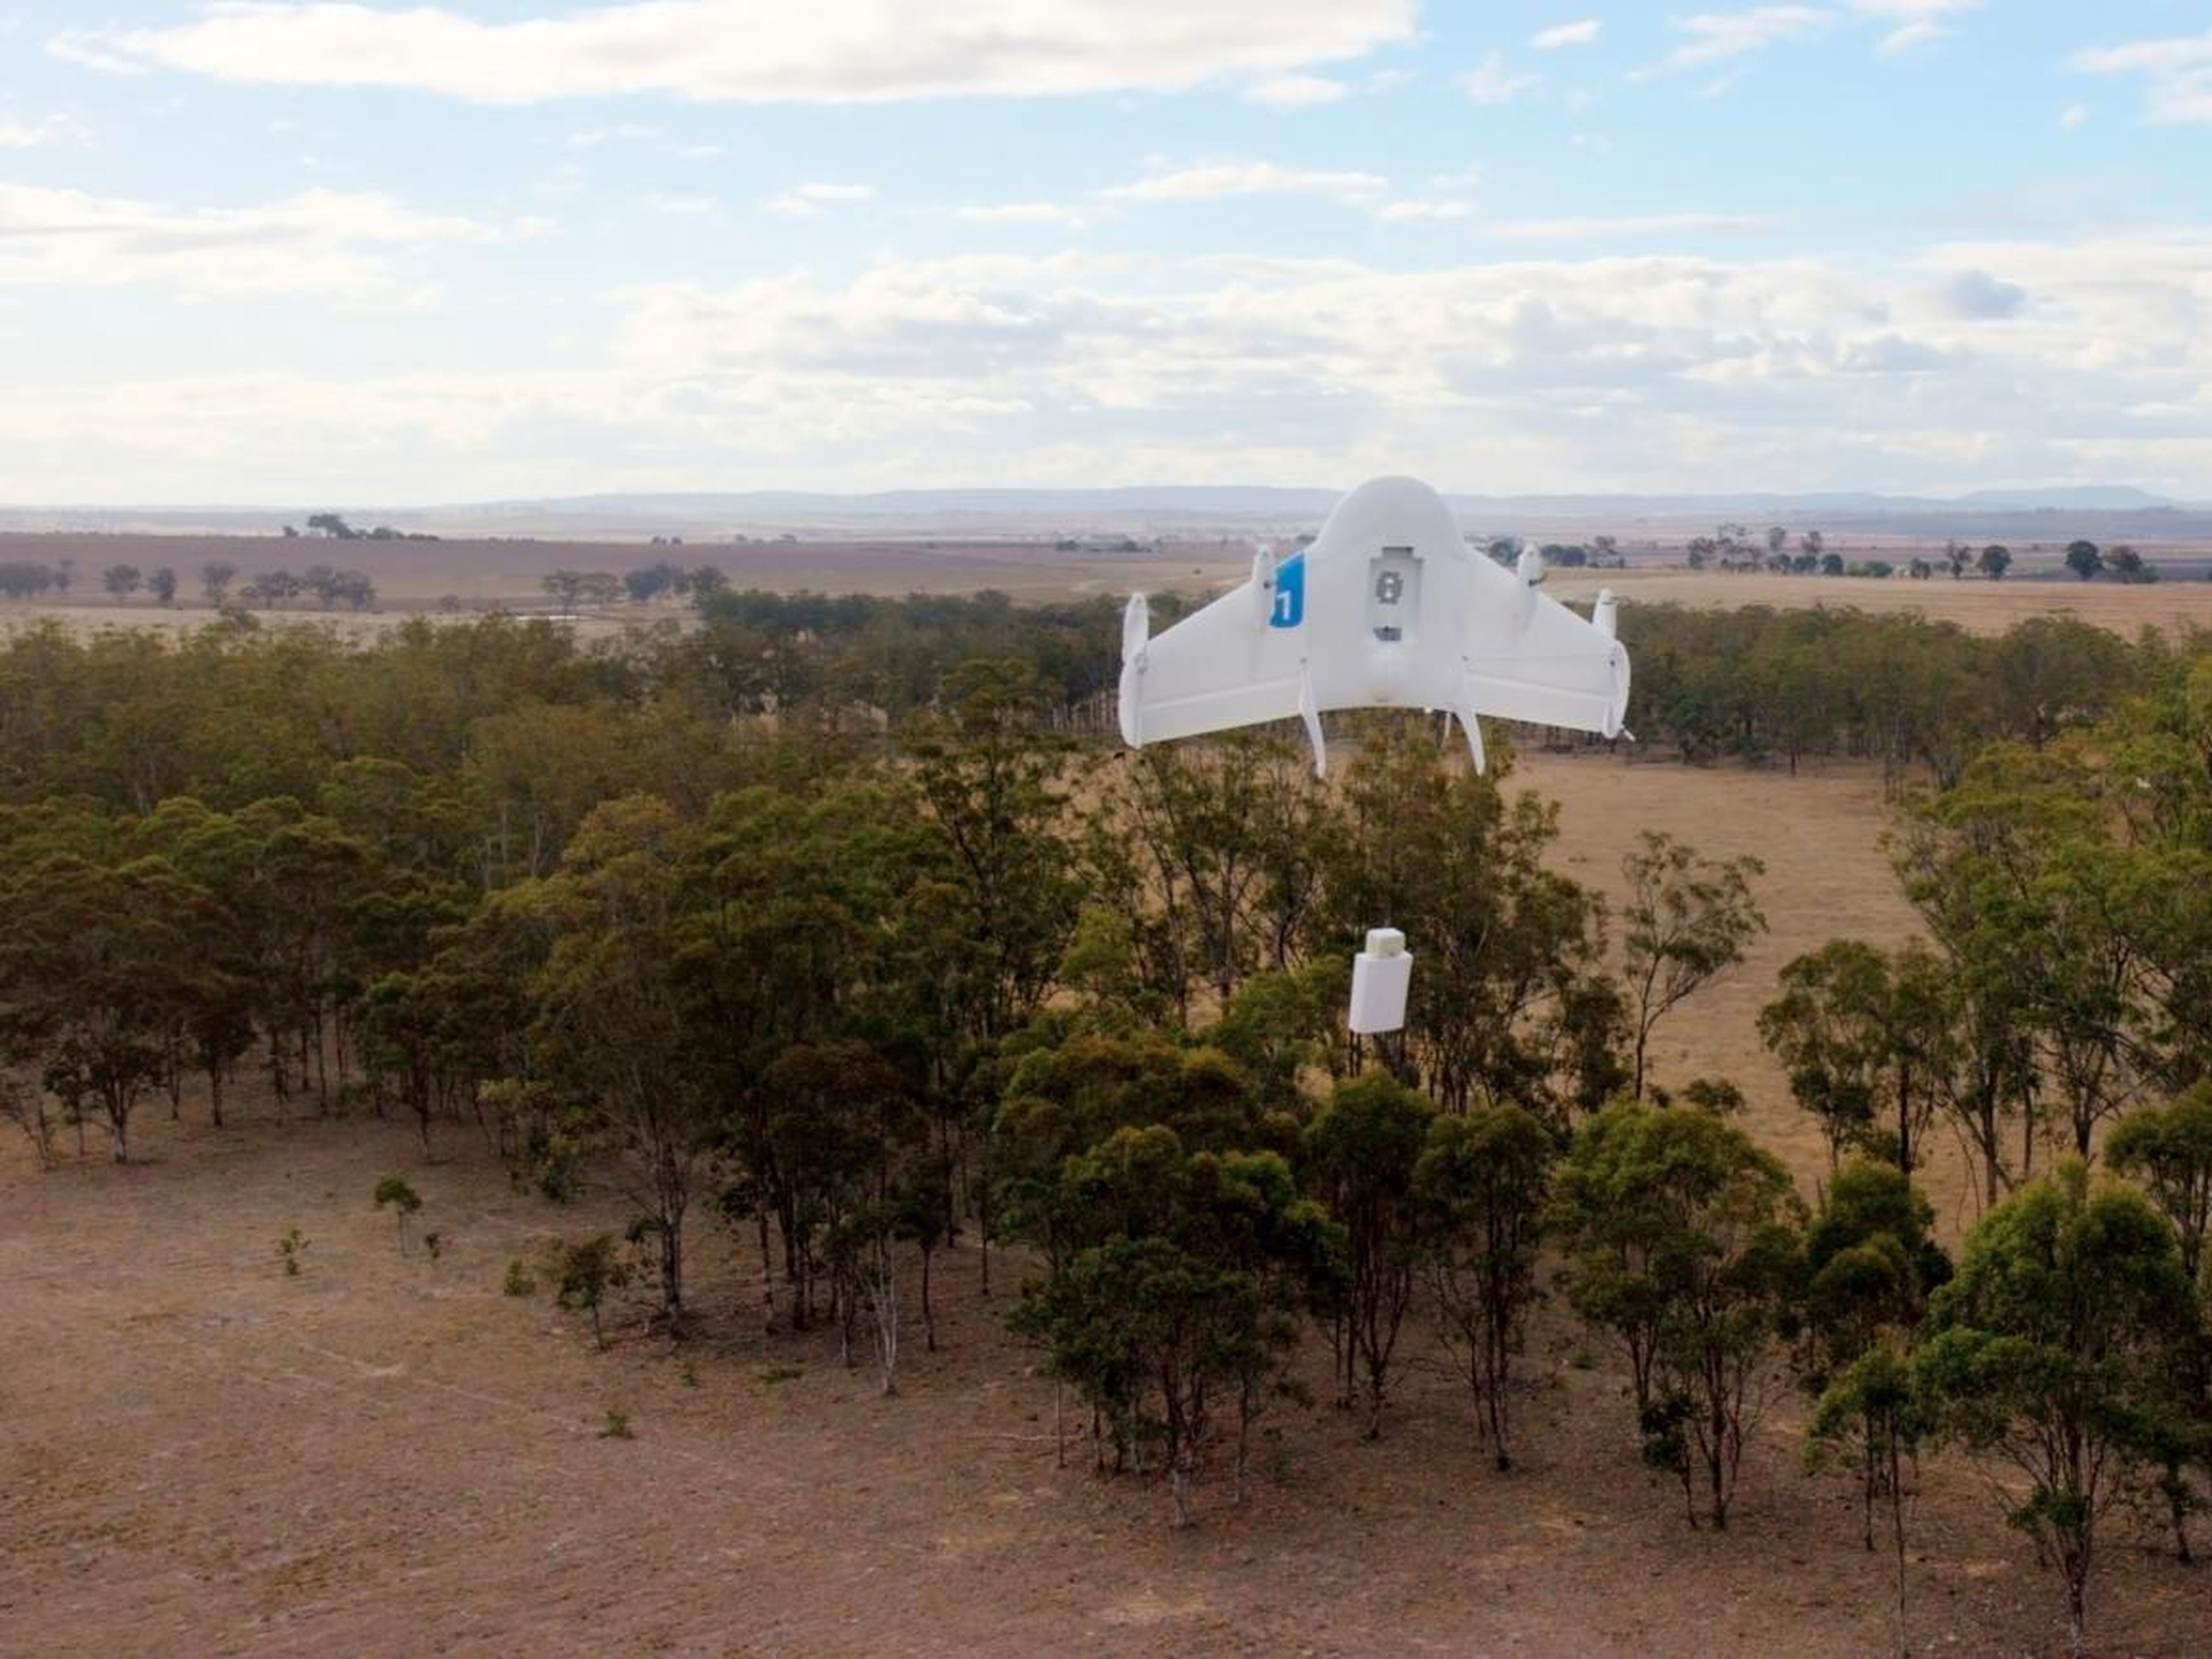 Project Wing is also a former project inside X. The commercial drone delivery service made headlines in September 2016 when it flew Chipotle burritos to Virginia Tech students. Wing has had trouble though, such as accusations of